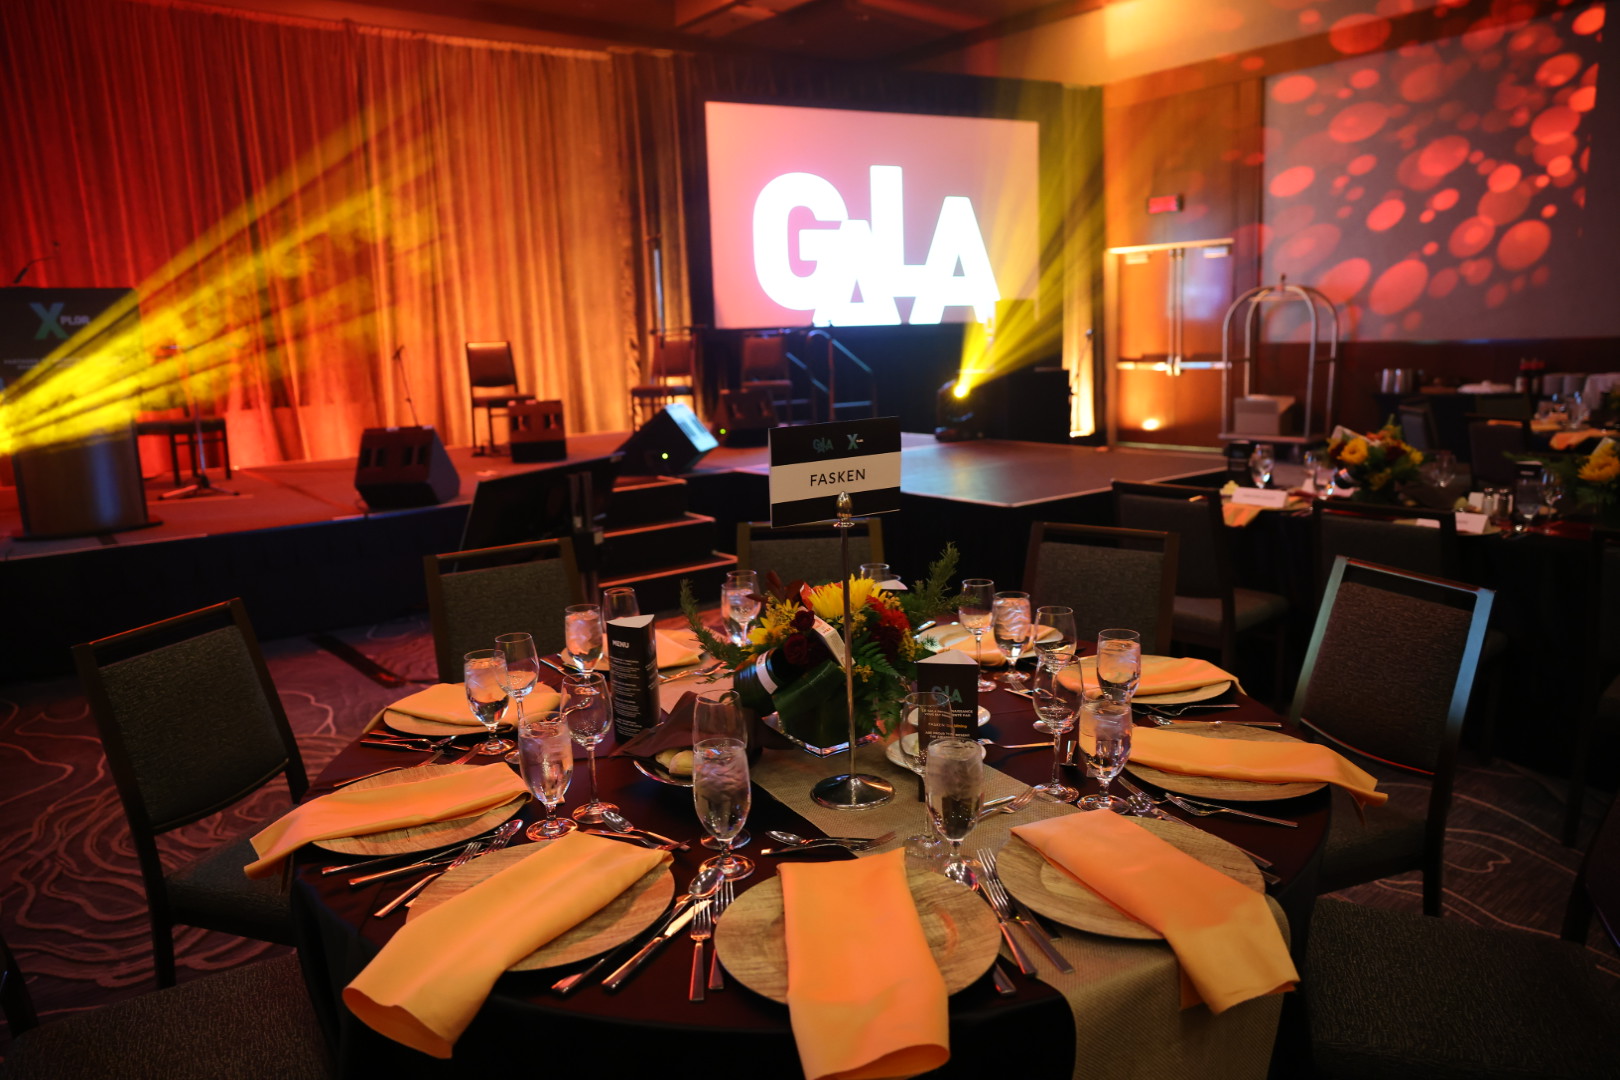 Gala space during the Xplor convention